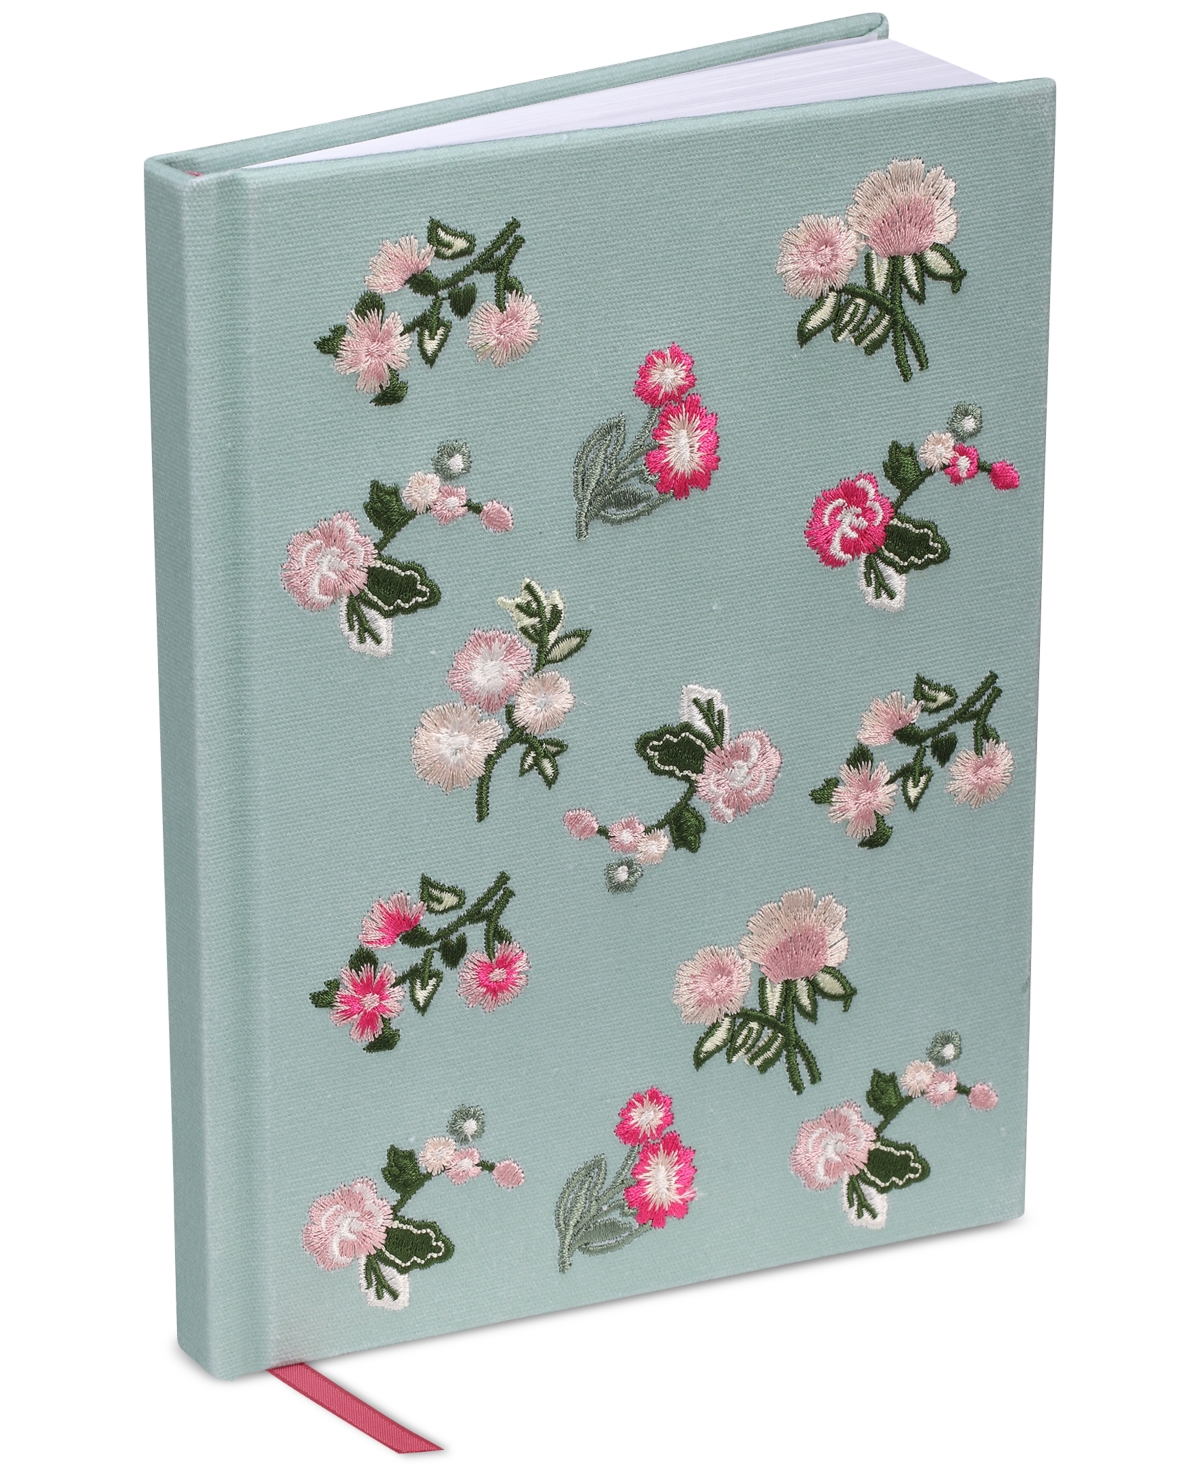 Flower Show Embroidered Notebook, Created for Macy's - Floral Multi